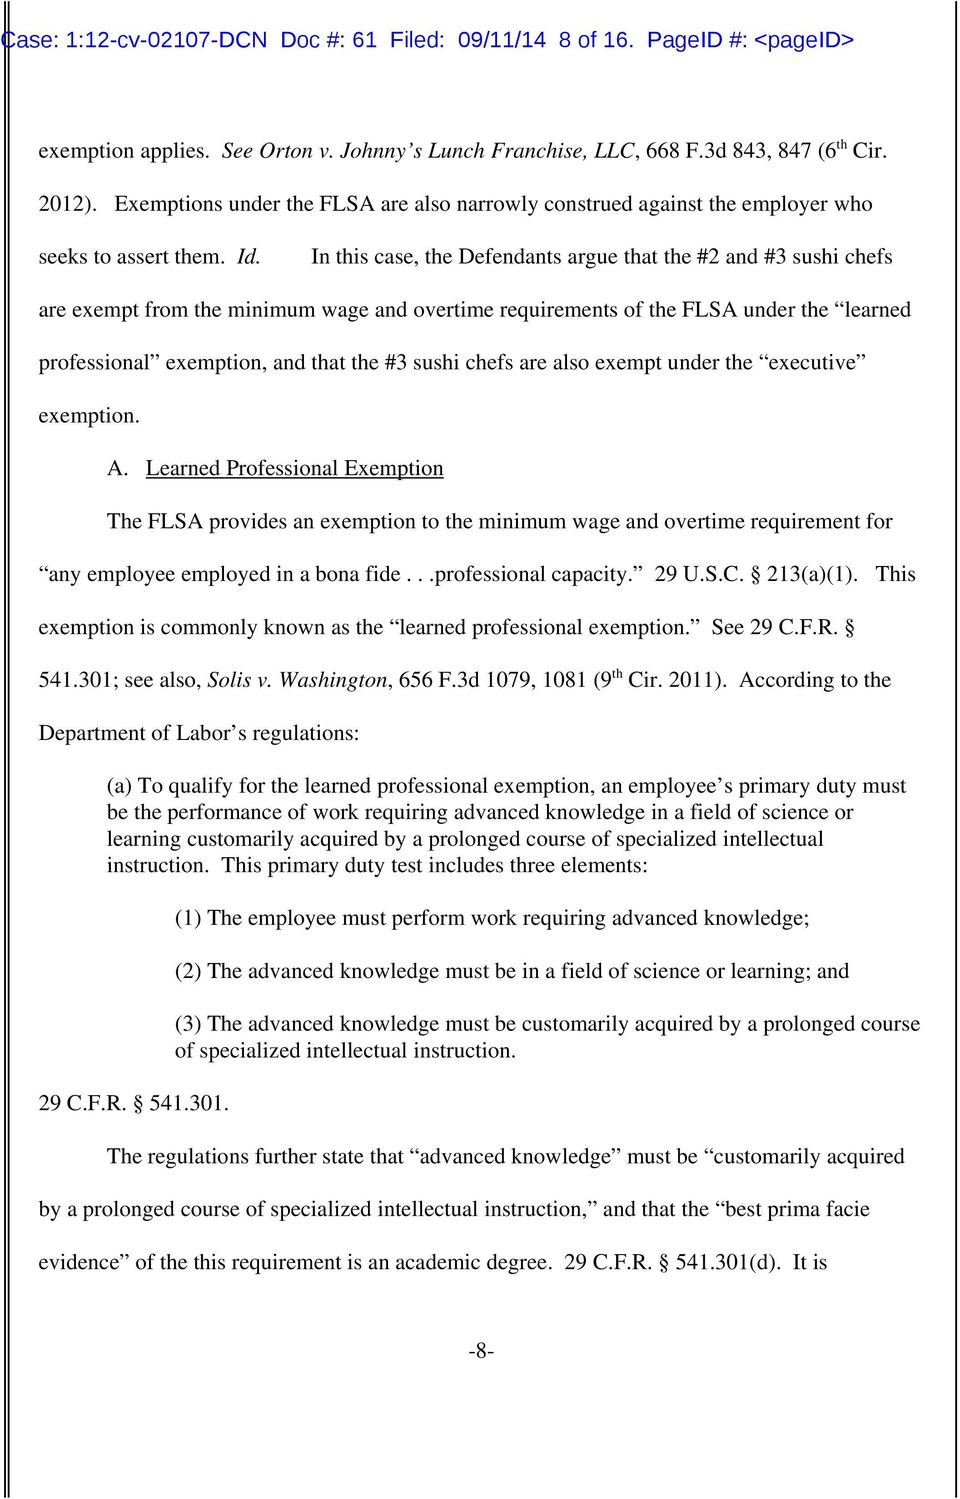 In this case, the Defendants argue that the #2 and #3 sushi chefs are exempt from the minimum wage and overtime requirements of the FLSA under the learned professional exemption, and that the #3